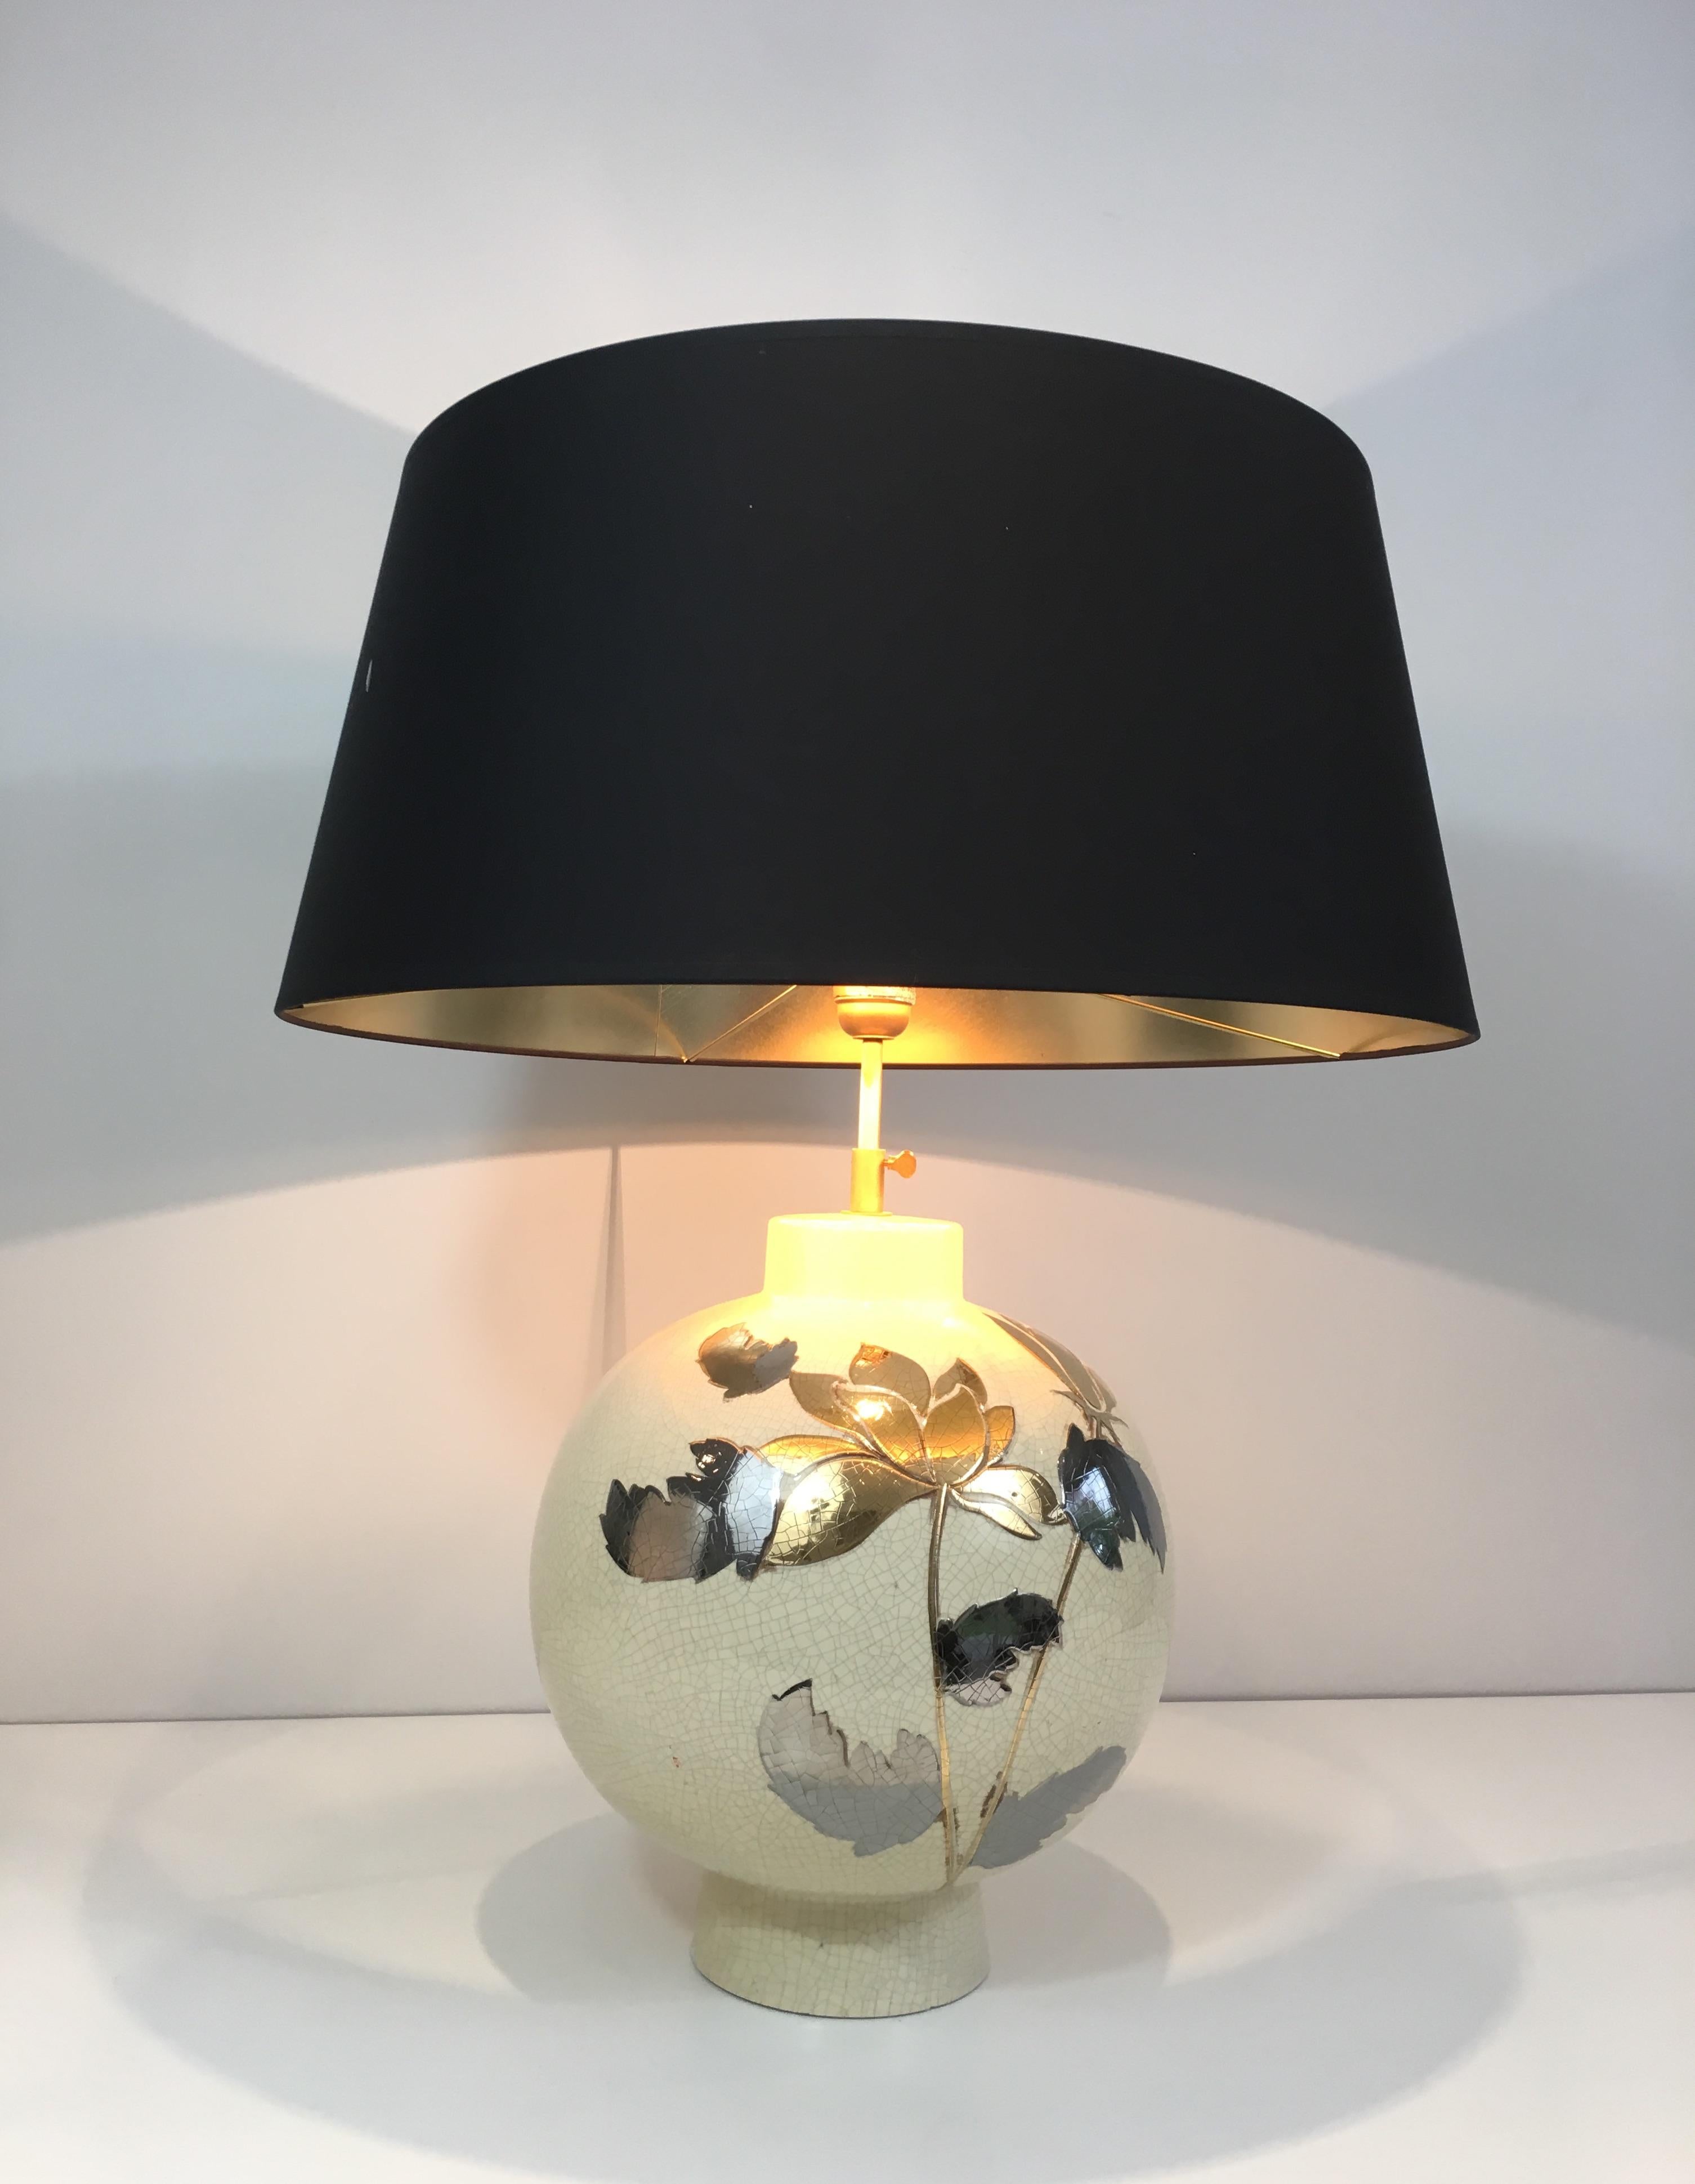 By L Drummer, Cracked Ceramic Lamp with Silver and Gold Flower Decoration on the 8